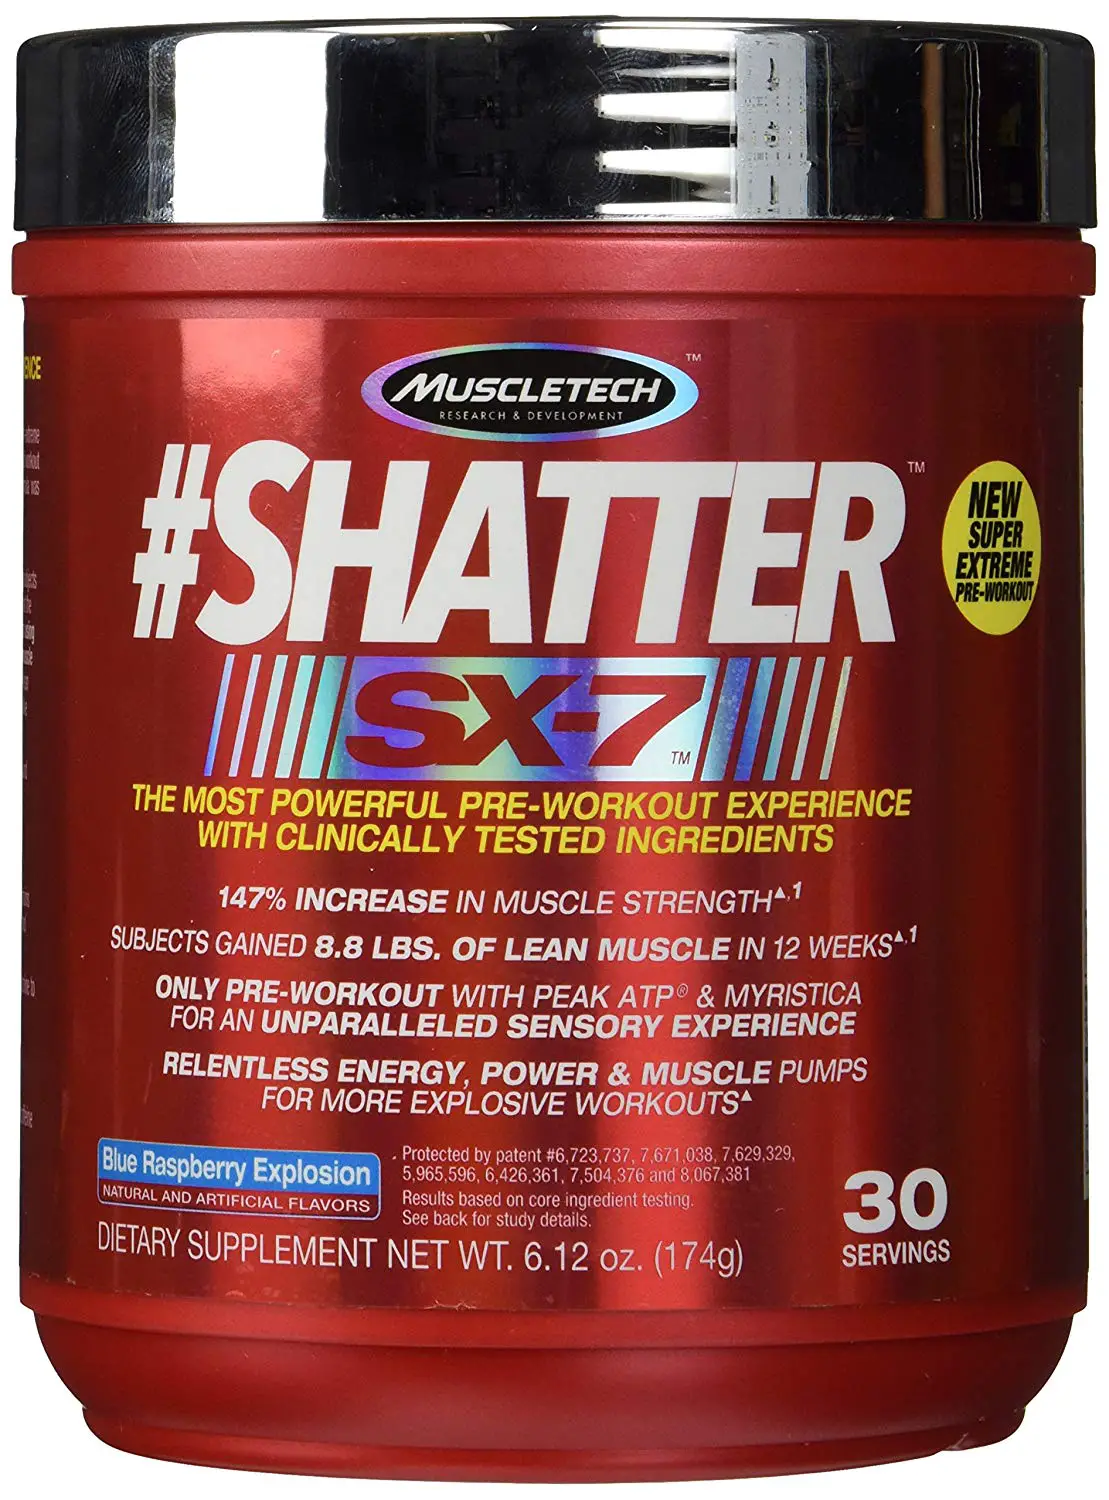 We reviewed #Shatter SX-7 Pre-Workout by MuscleTech! 